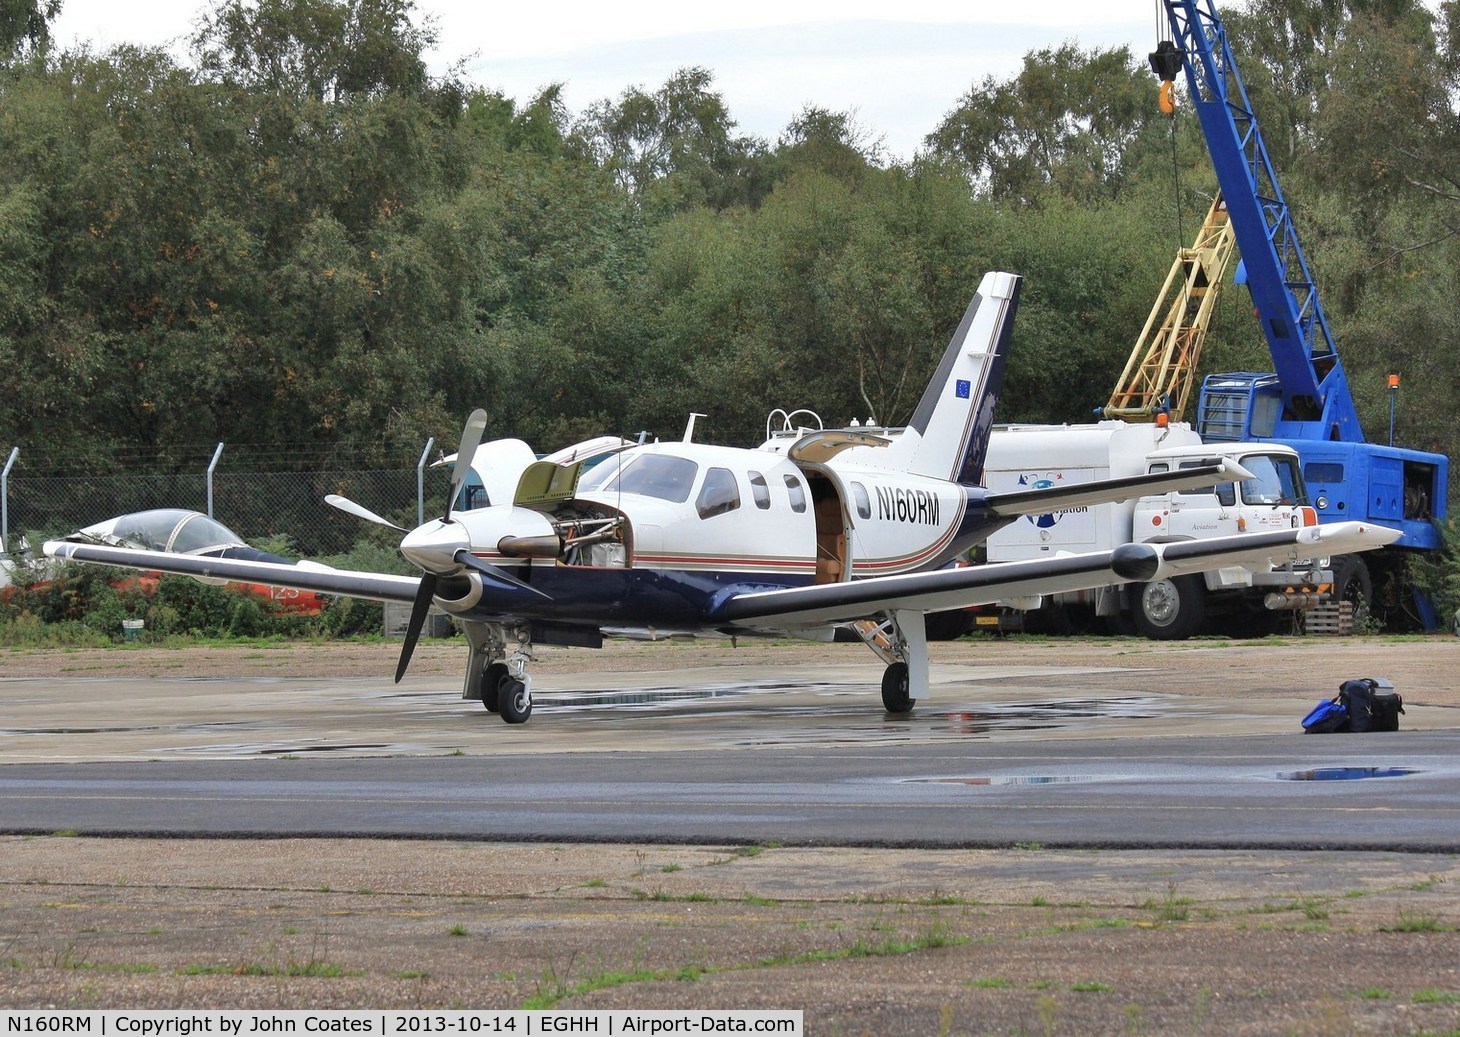 N160RM, 1992 Socata TBM-700 C/N 0063, Receiving attention at DS Worldwide